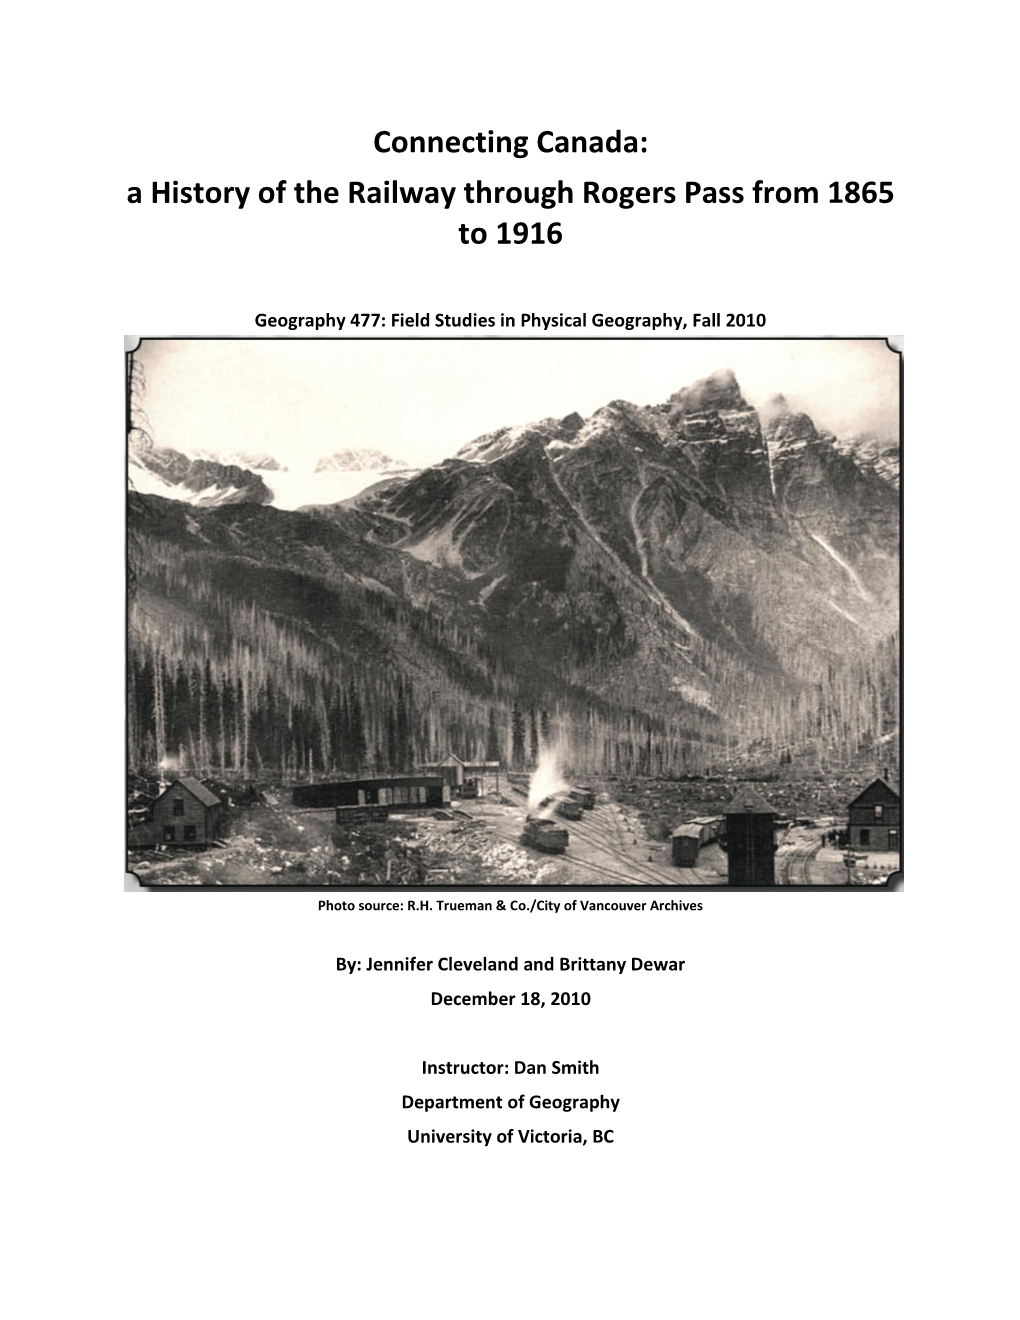 A History of the Railway Through Rogers Pass from 1865 to 1916